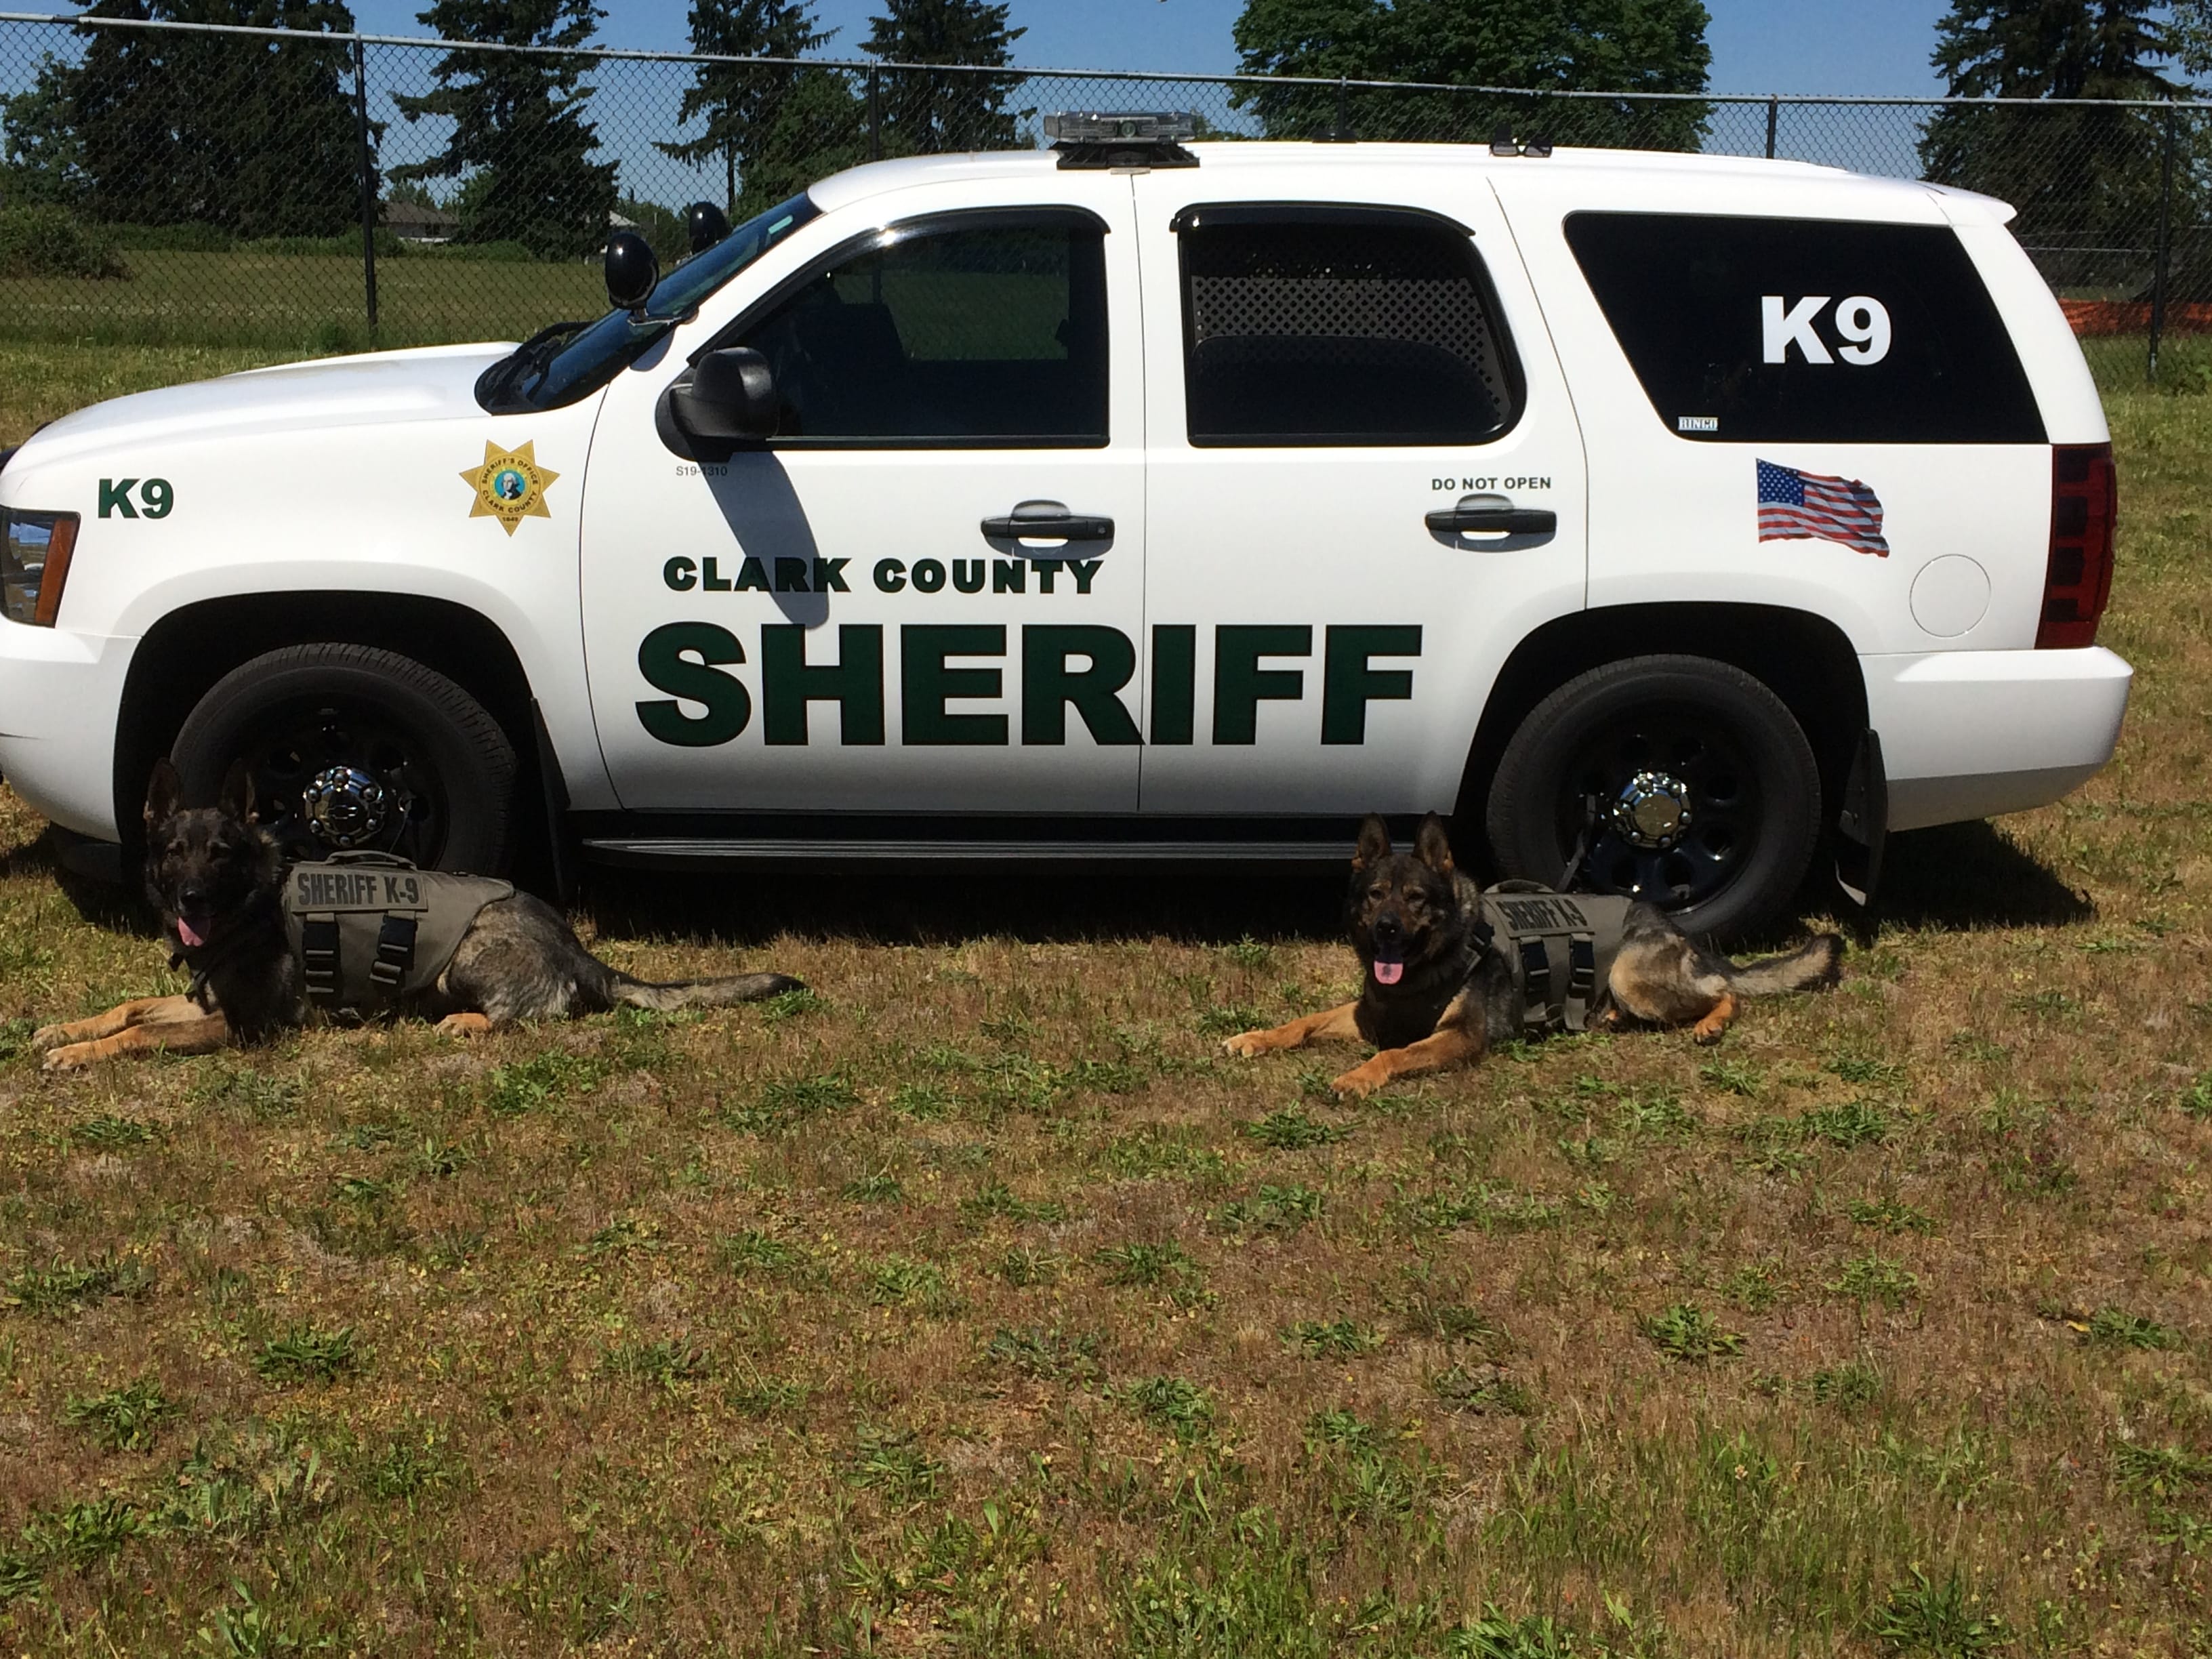 Clark County Sheriff’s Office police dogs Ringo and Jango have received the bullet and stab protective vests.